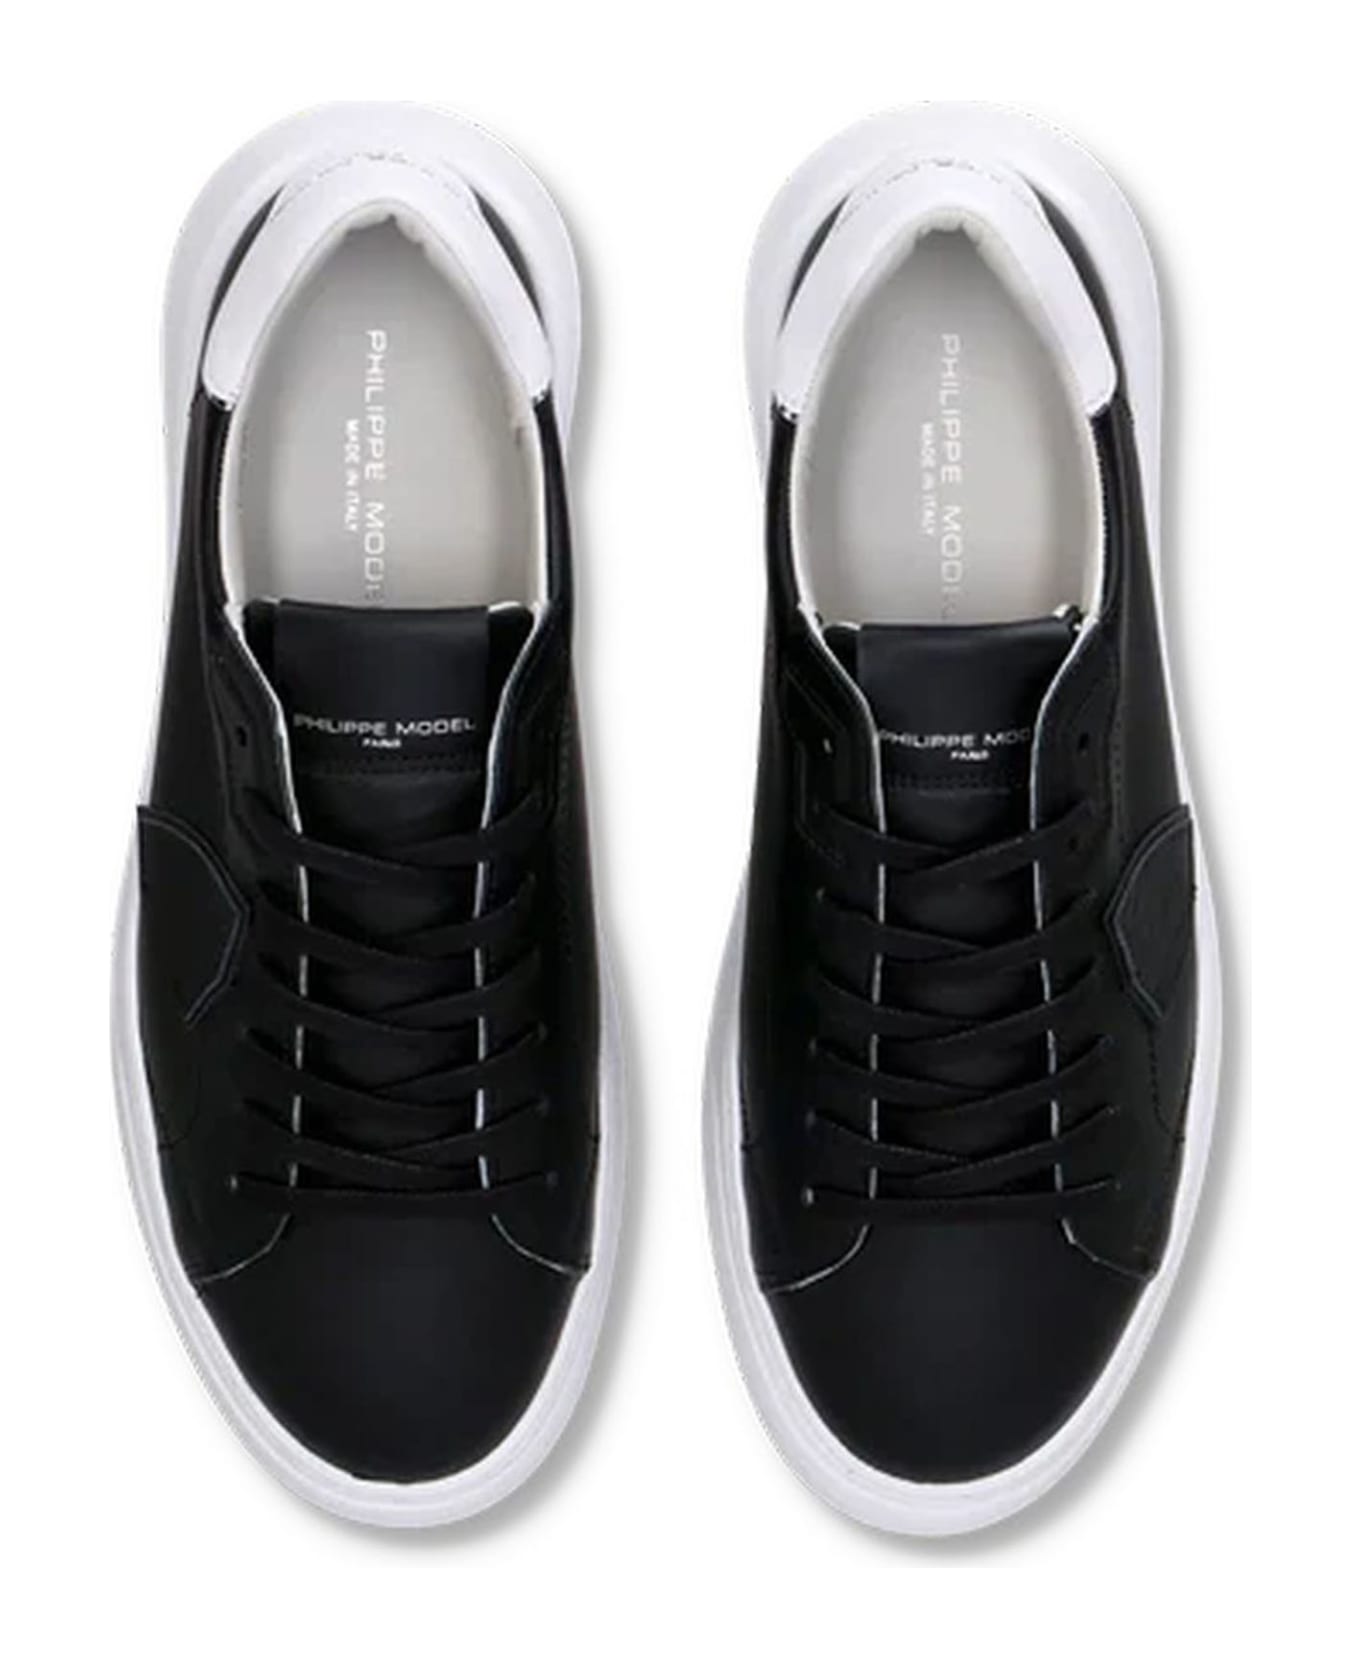 Philippe Model Temple Low-top Sneakers Black And White - Black